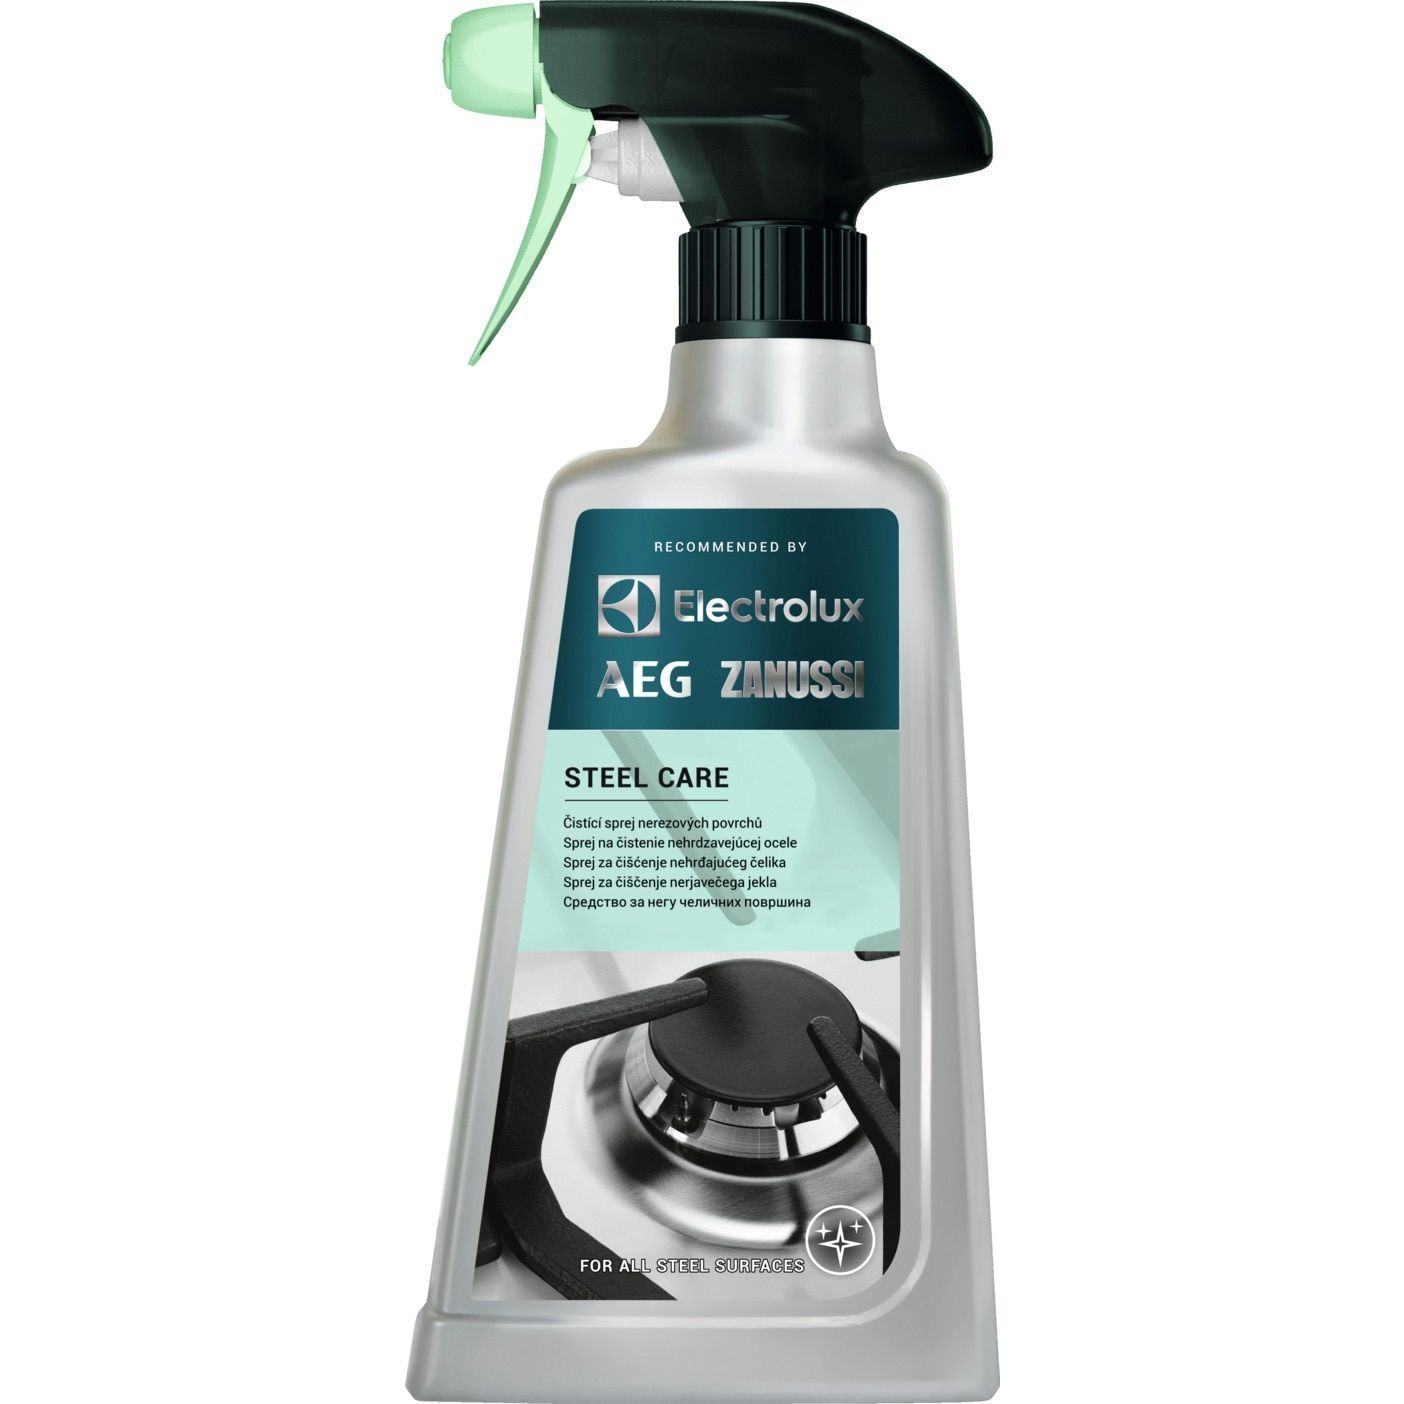 Cleaning Spray for Electrolux AEG Zanussi Stainless Steel Surfaces - 9029799468 AEG / Electrolux / Zanussi